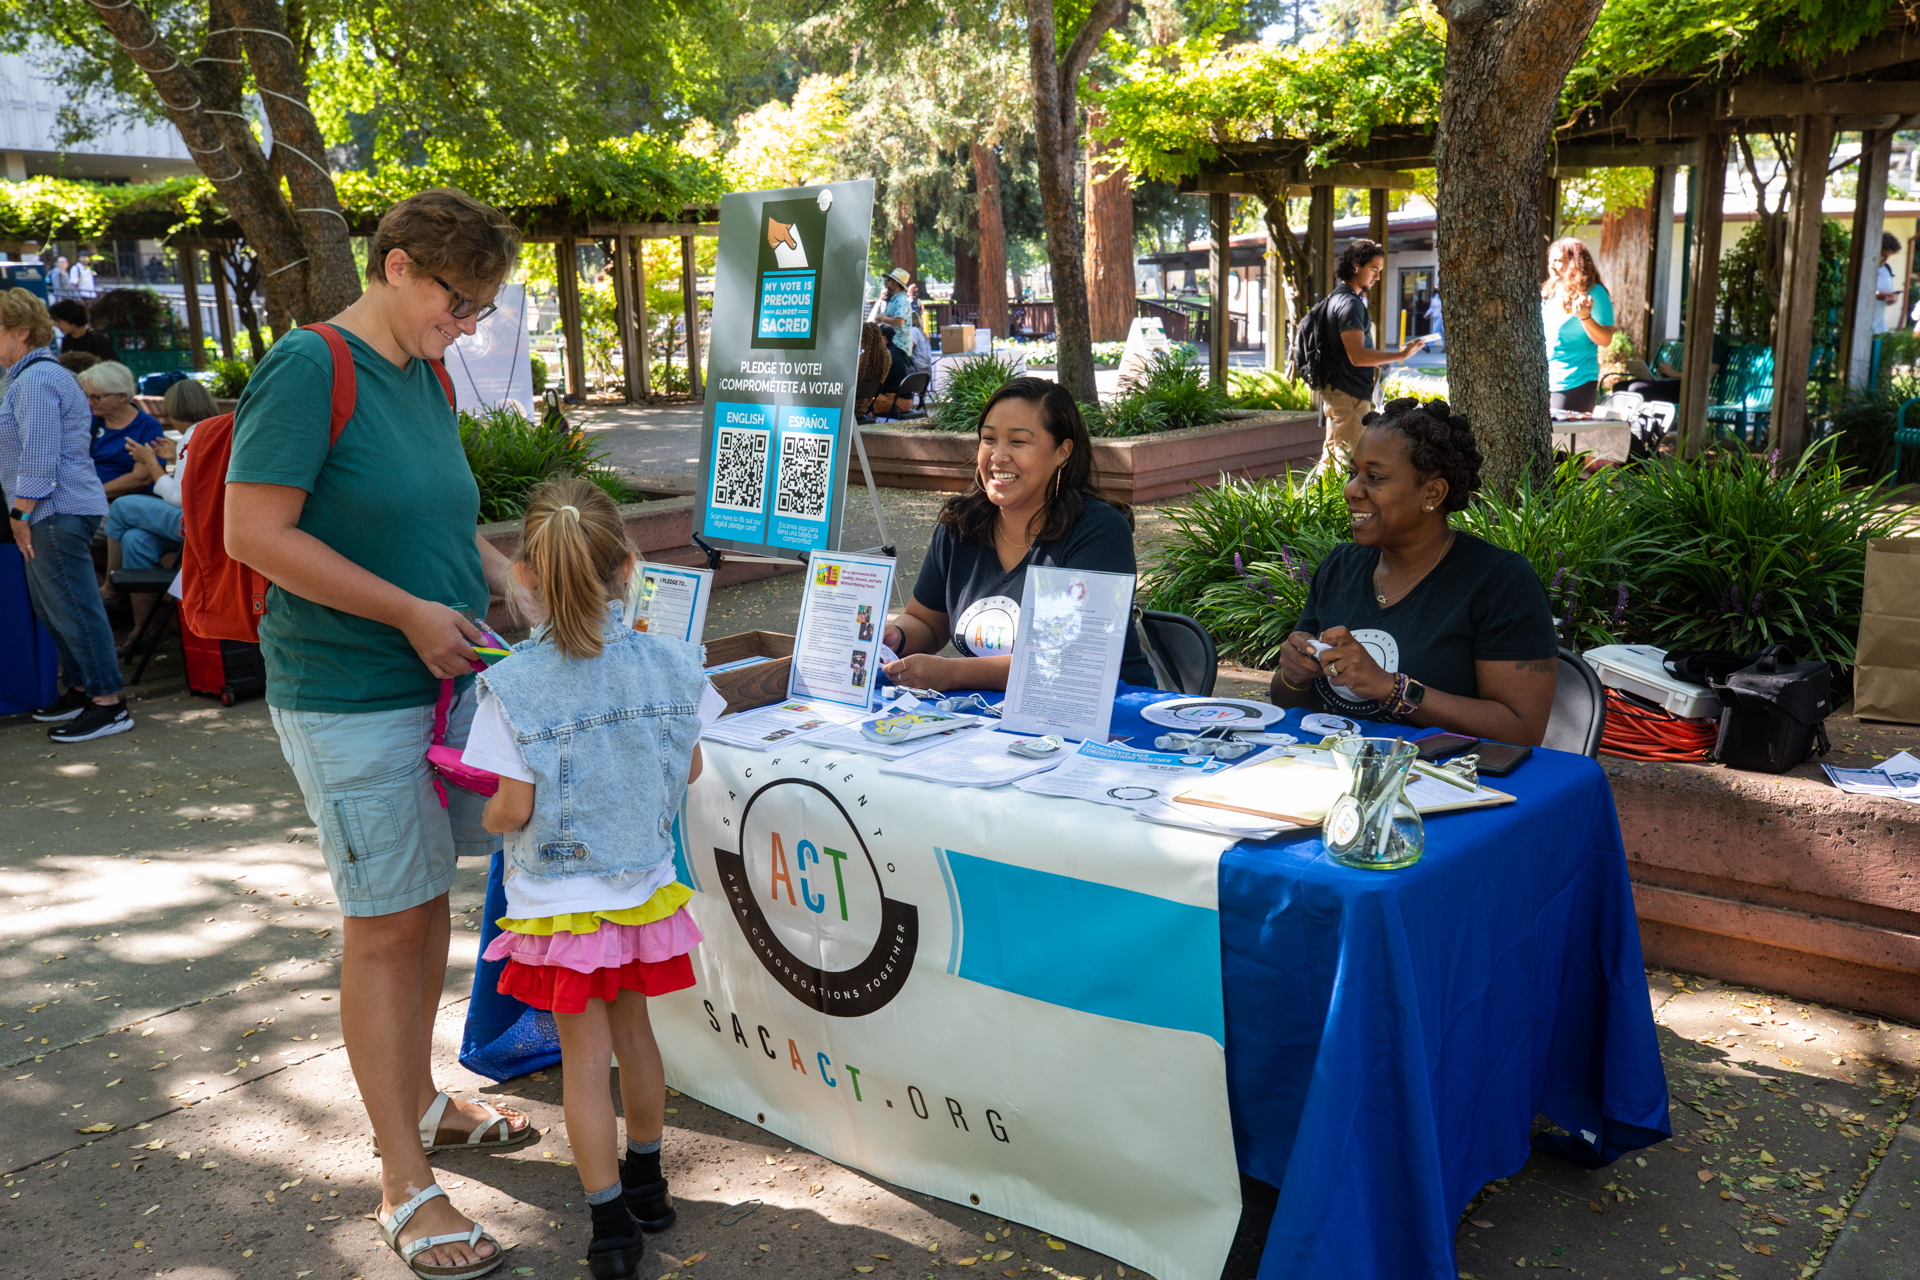 A woman and child visit the Sacramento ACT table at the Civic Engagement Resource Fair in the Library Quad at Sac State. 